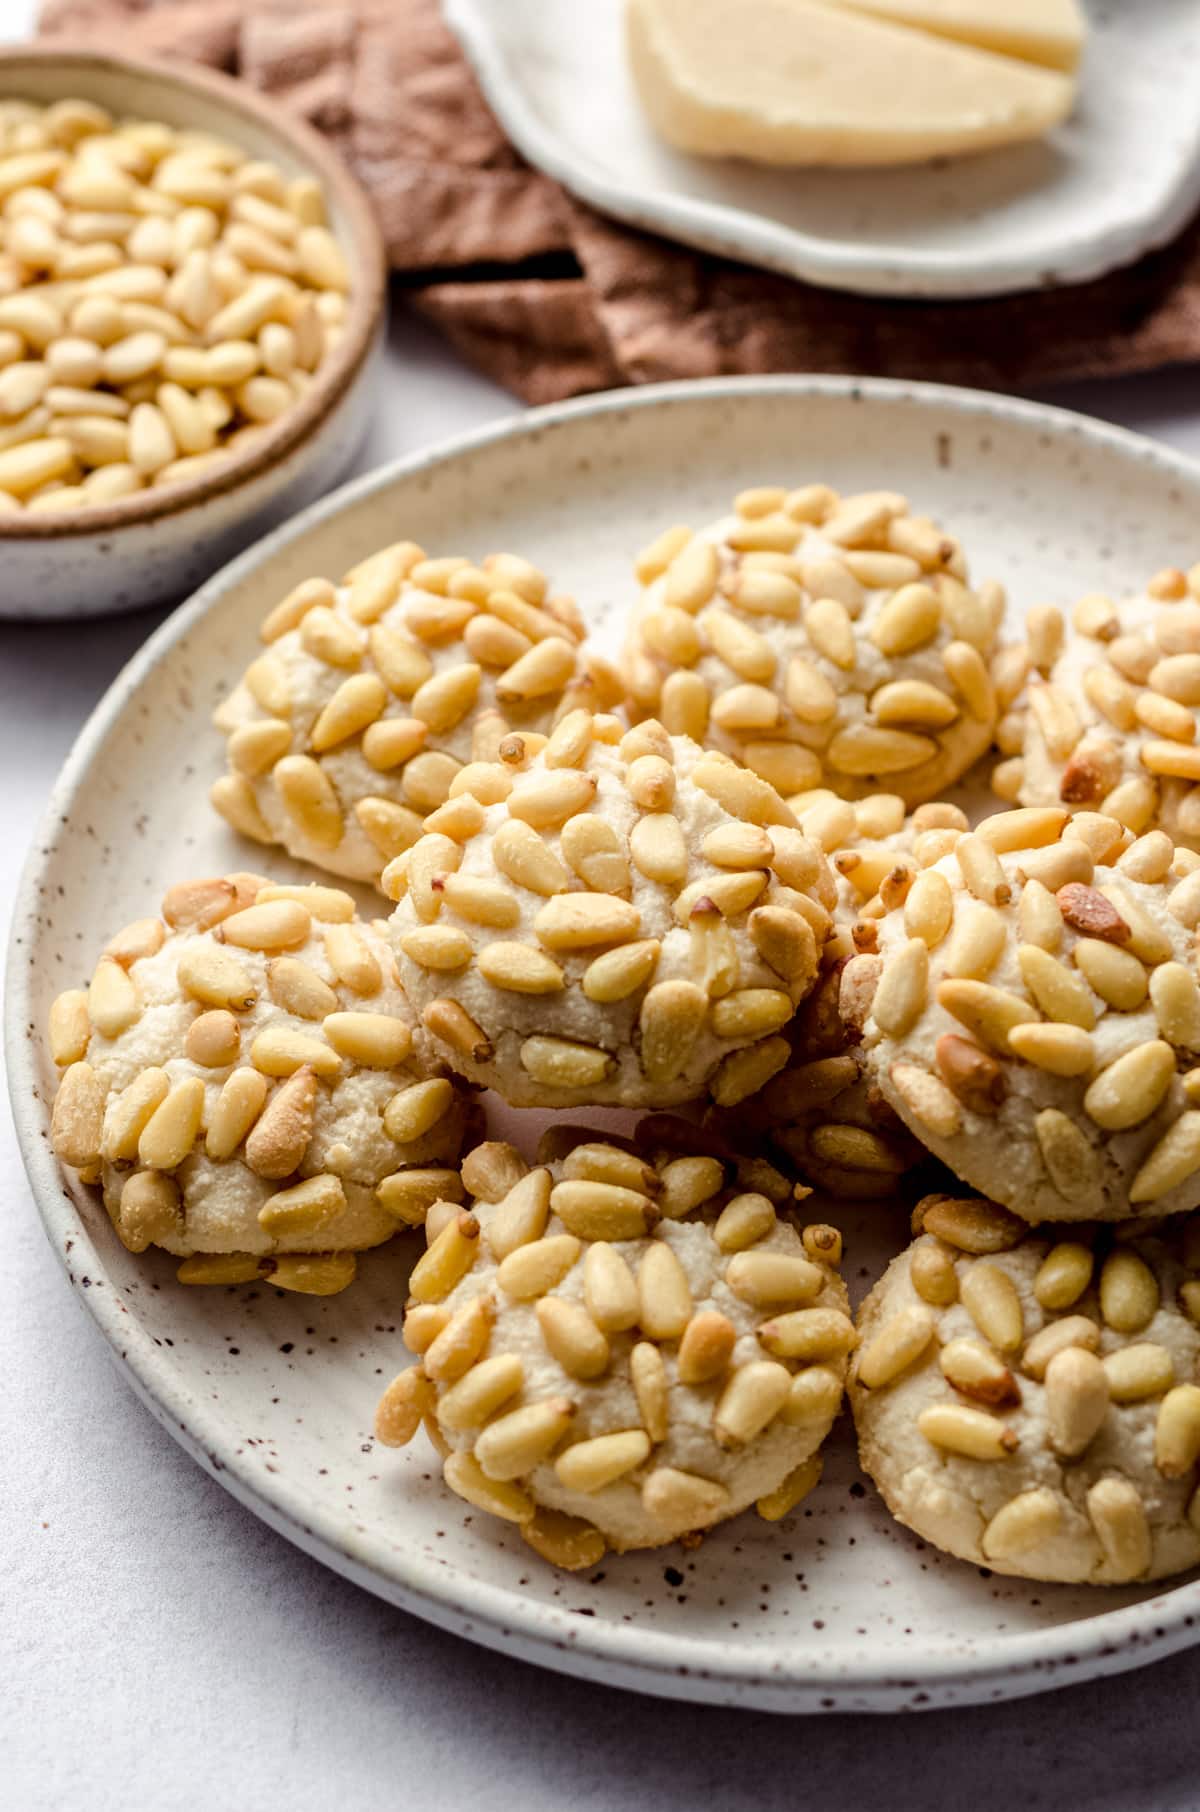 A plate of pignoli cookies coated in pine nuts.